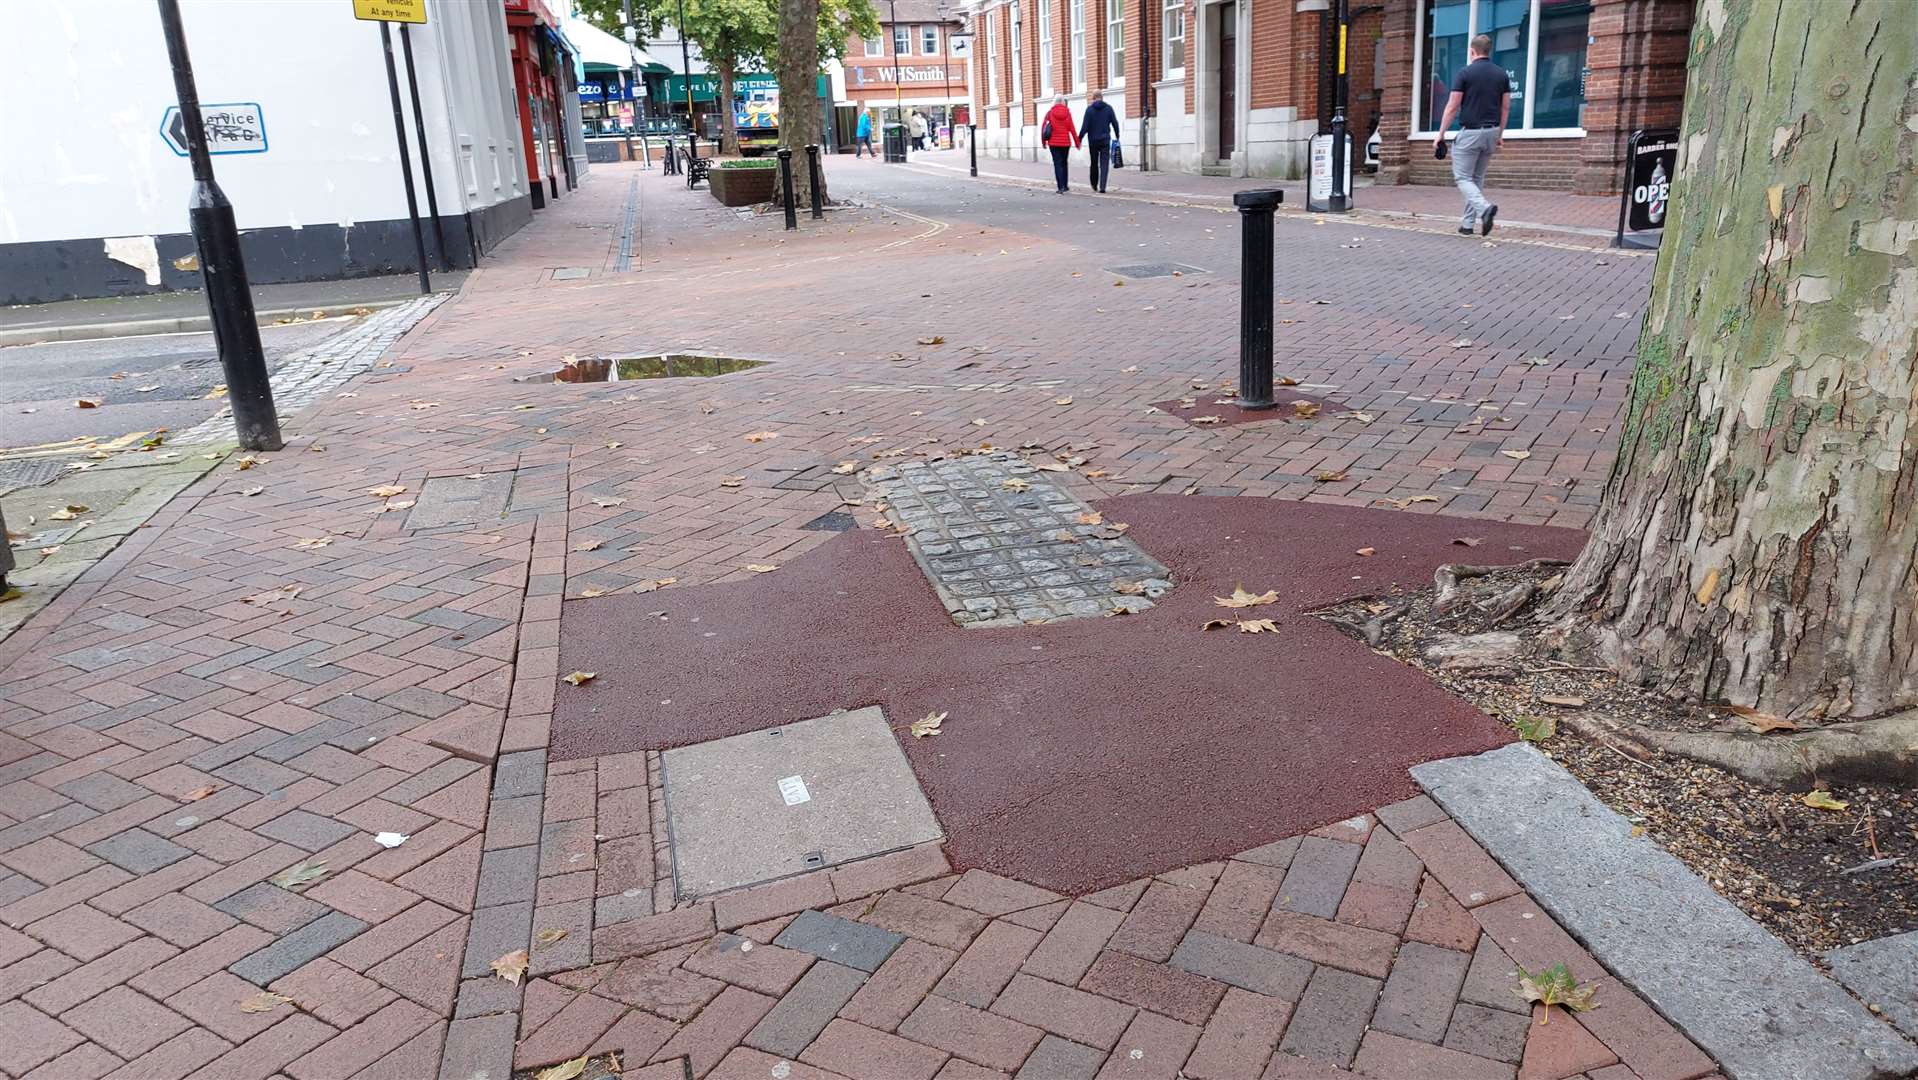 Uneven footpaths across Ashford are causing problems for people on mobility scooters